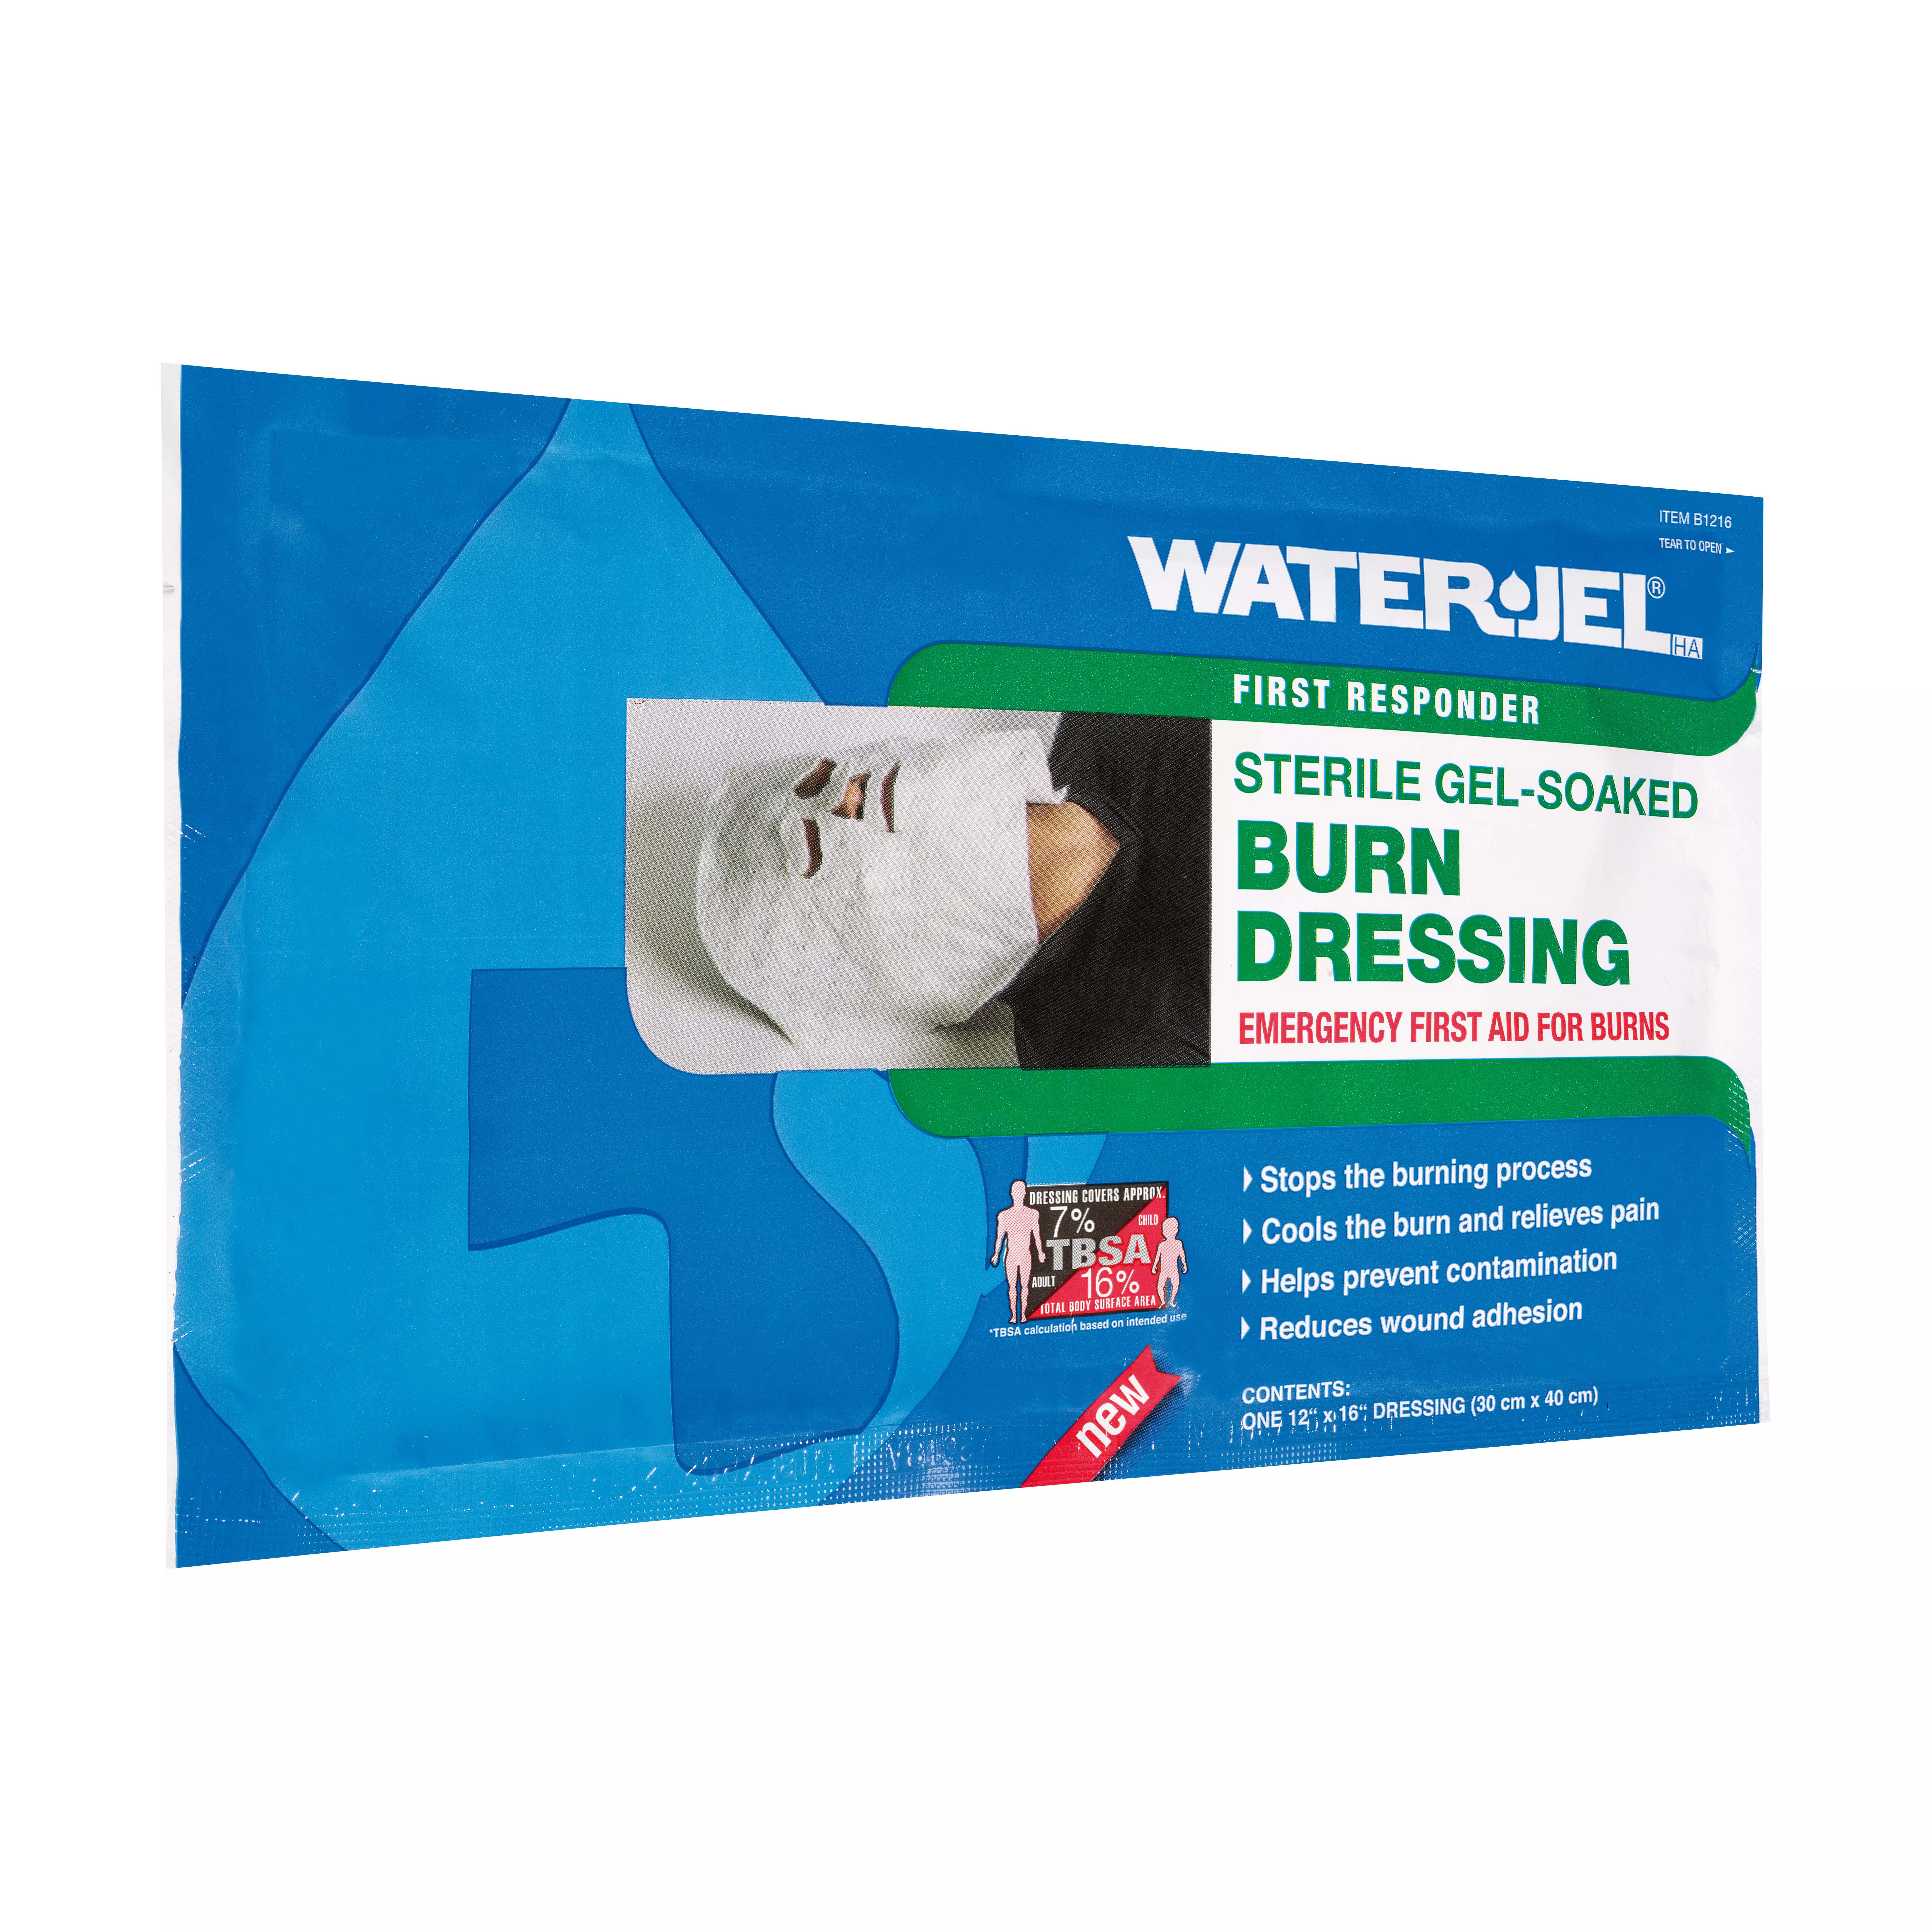 WATER-JEL® HA First Responder face compress, sterile